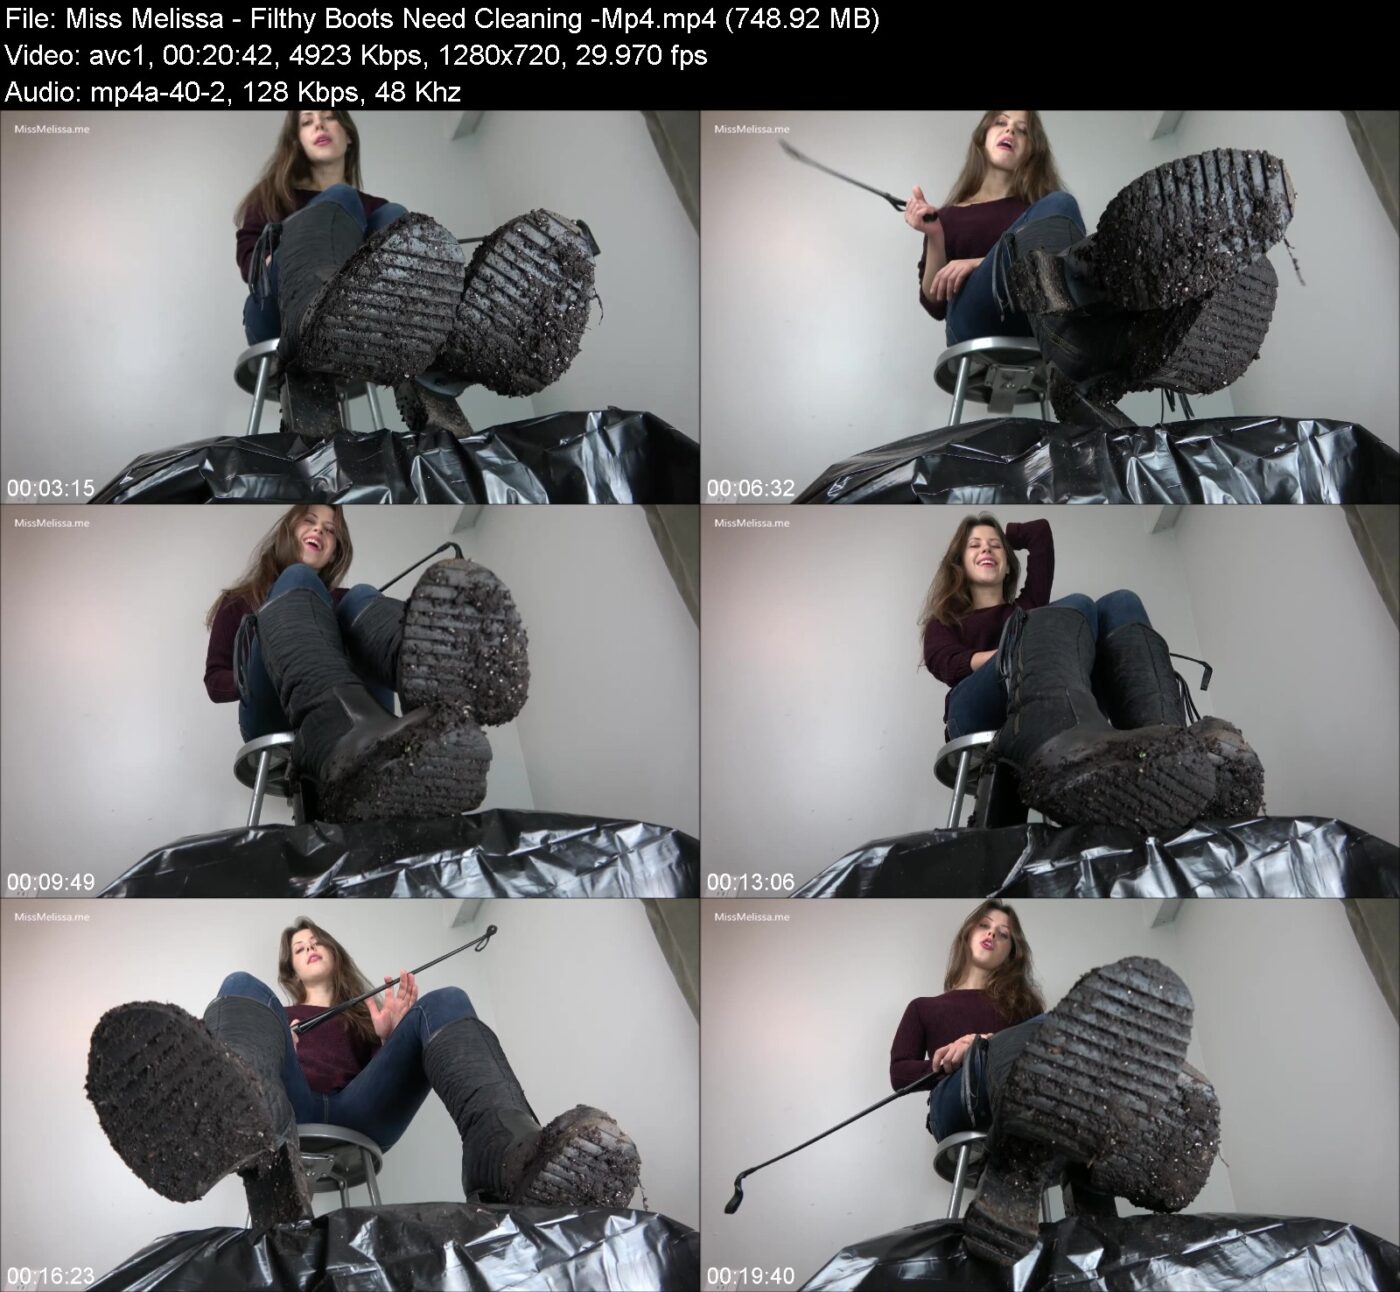 Miss Melissa in Filthy Boots Need Cleaning -Mp4